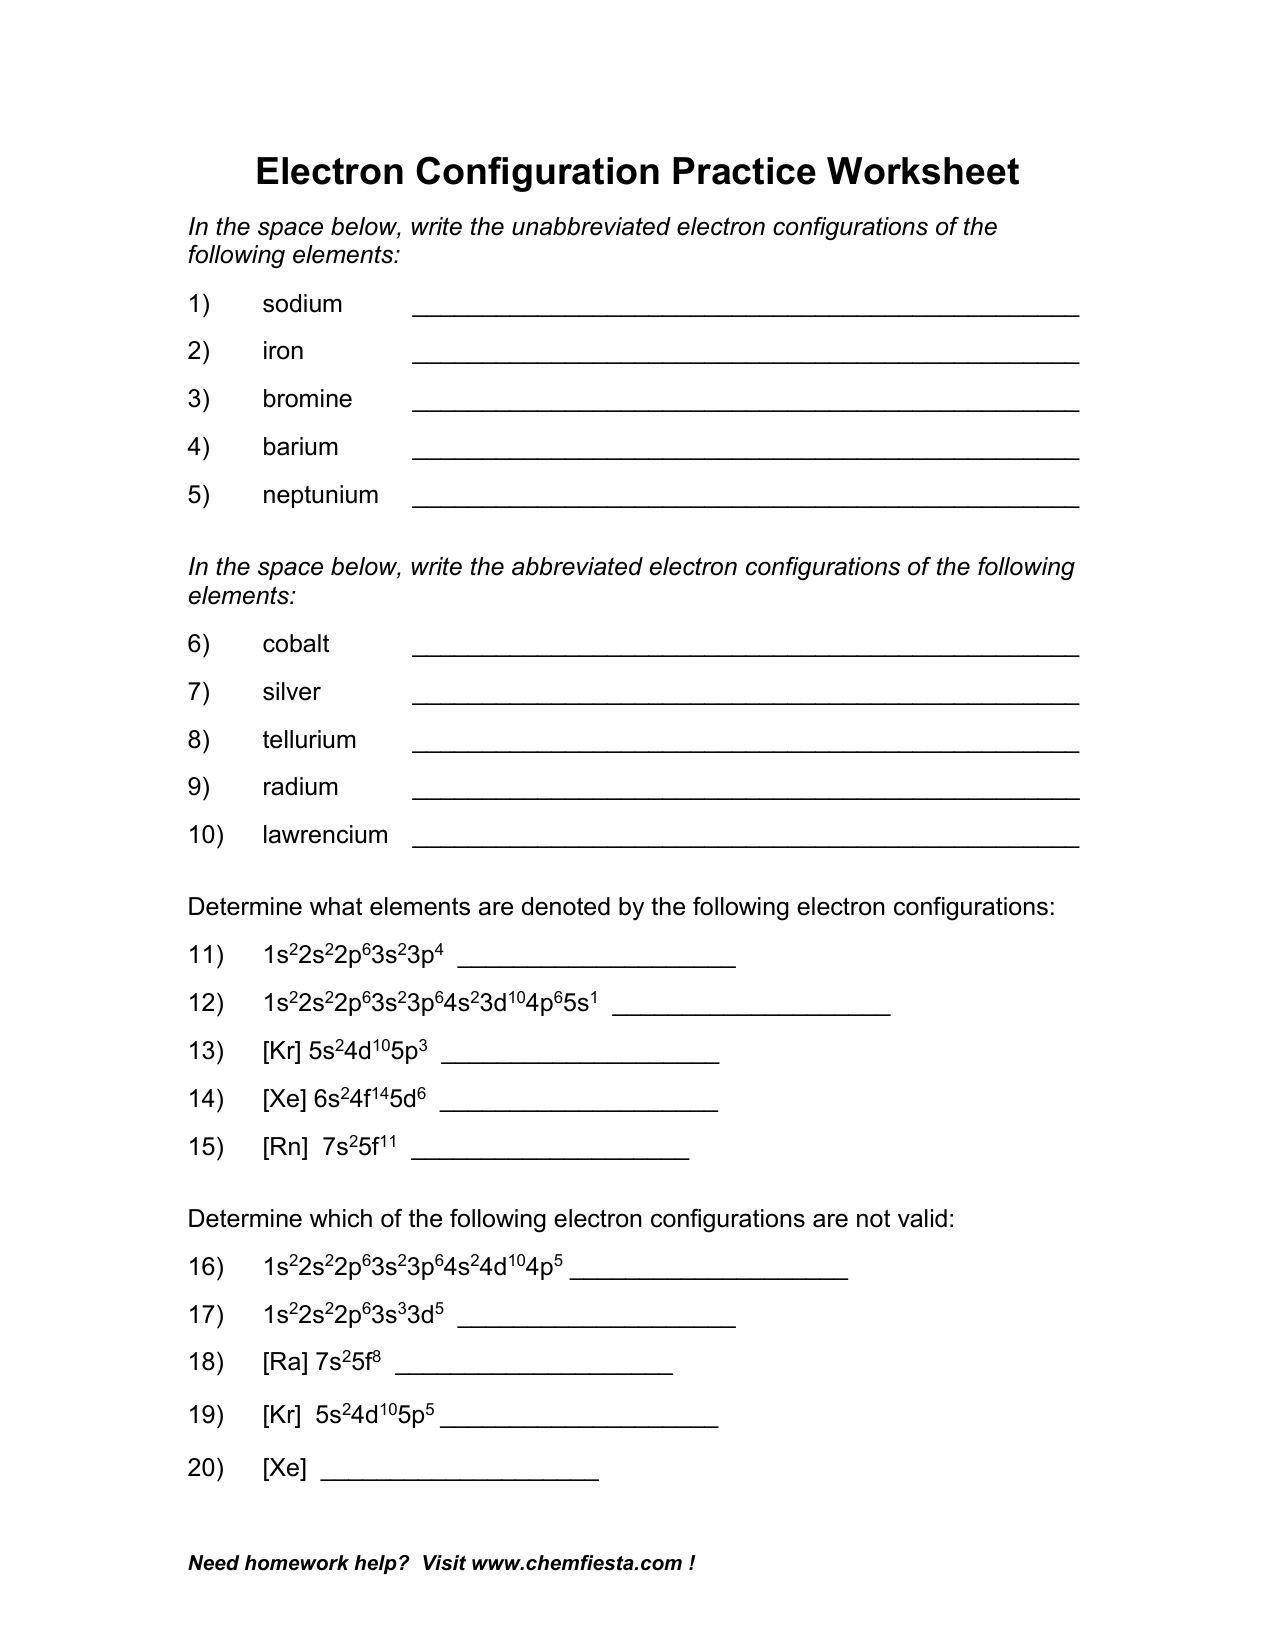 Electron Configuration Practice Worksheet For Electron Configuration Worksheet Answers